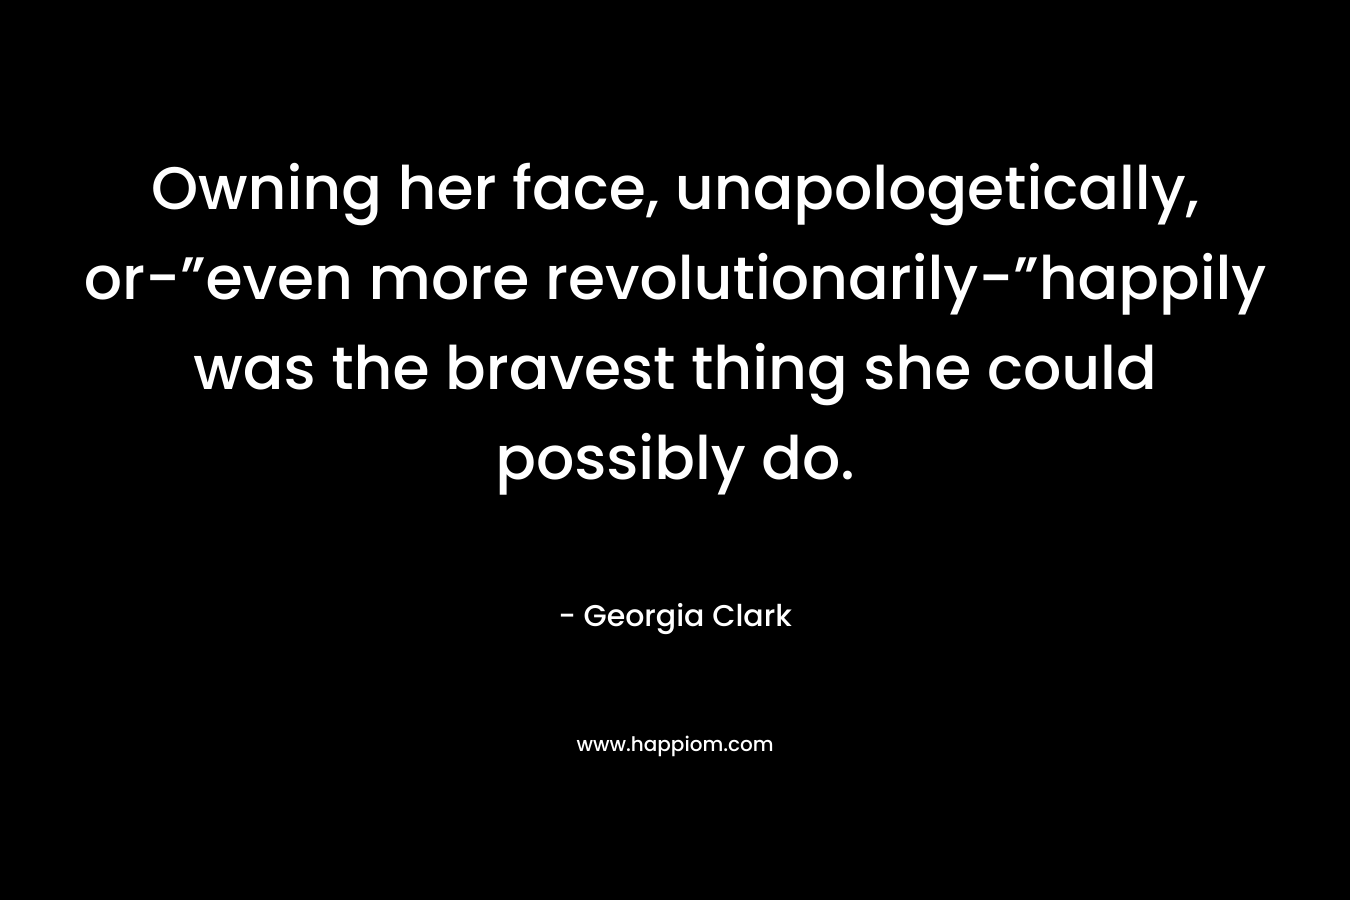 Owning her face, unapologetically, or-”even more revolutionarily-”happily was the bravest thing she could possibly do. – Georgia Clark